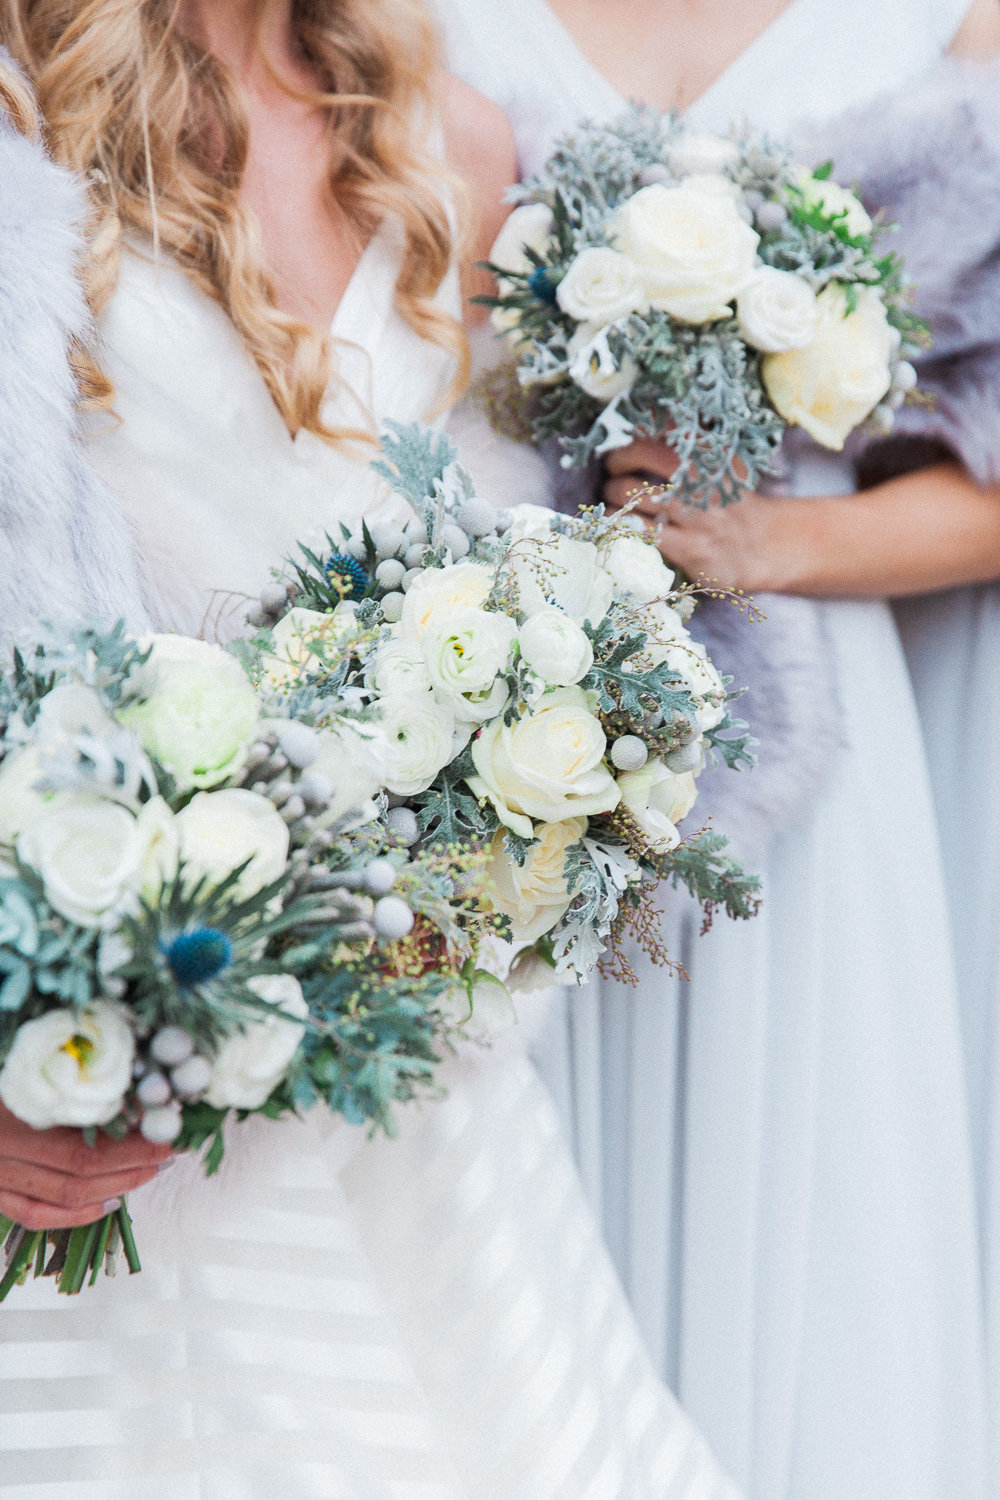 Bride and bridesmaids winter wedding bouquets in white and blue by London wedding photographer Maxeen Kim